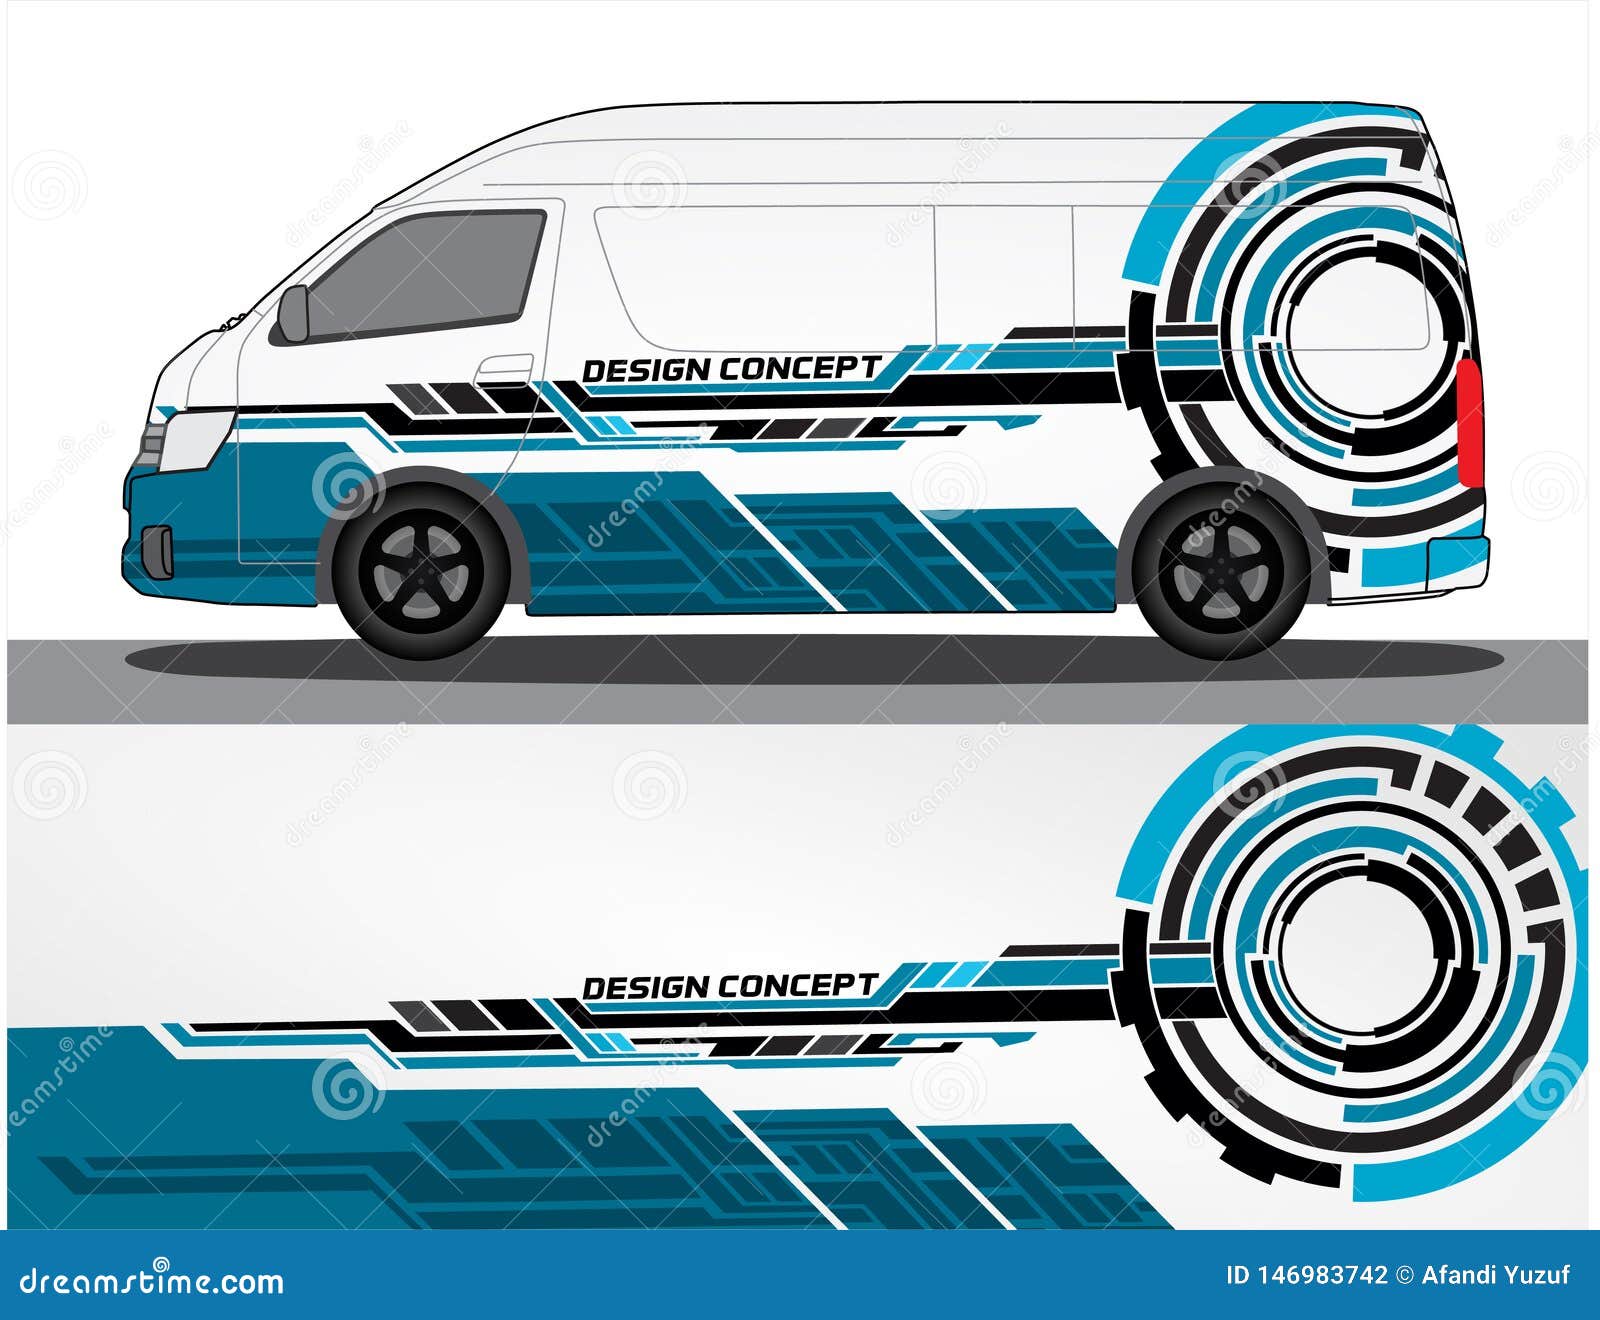 vinyls sticker set decals for car truck mini bus modify motorcycle. racing vehicle